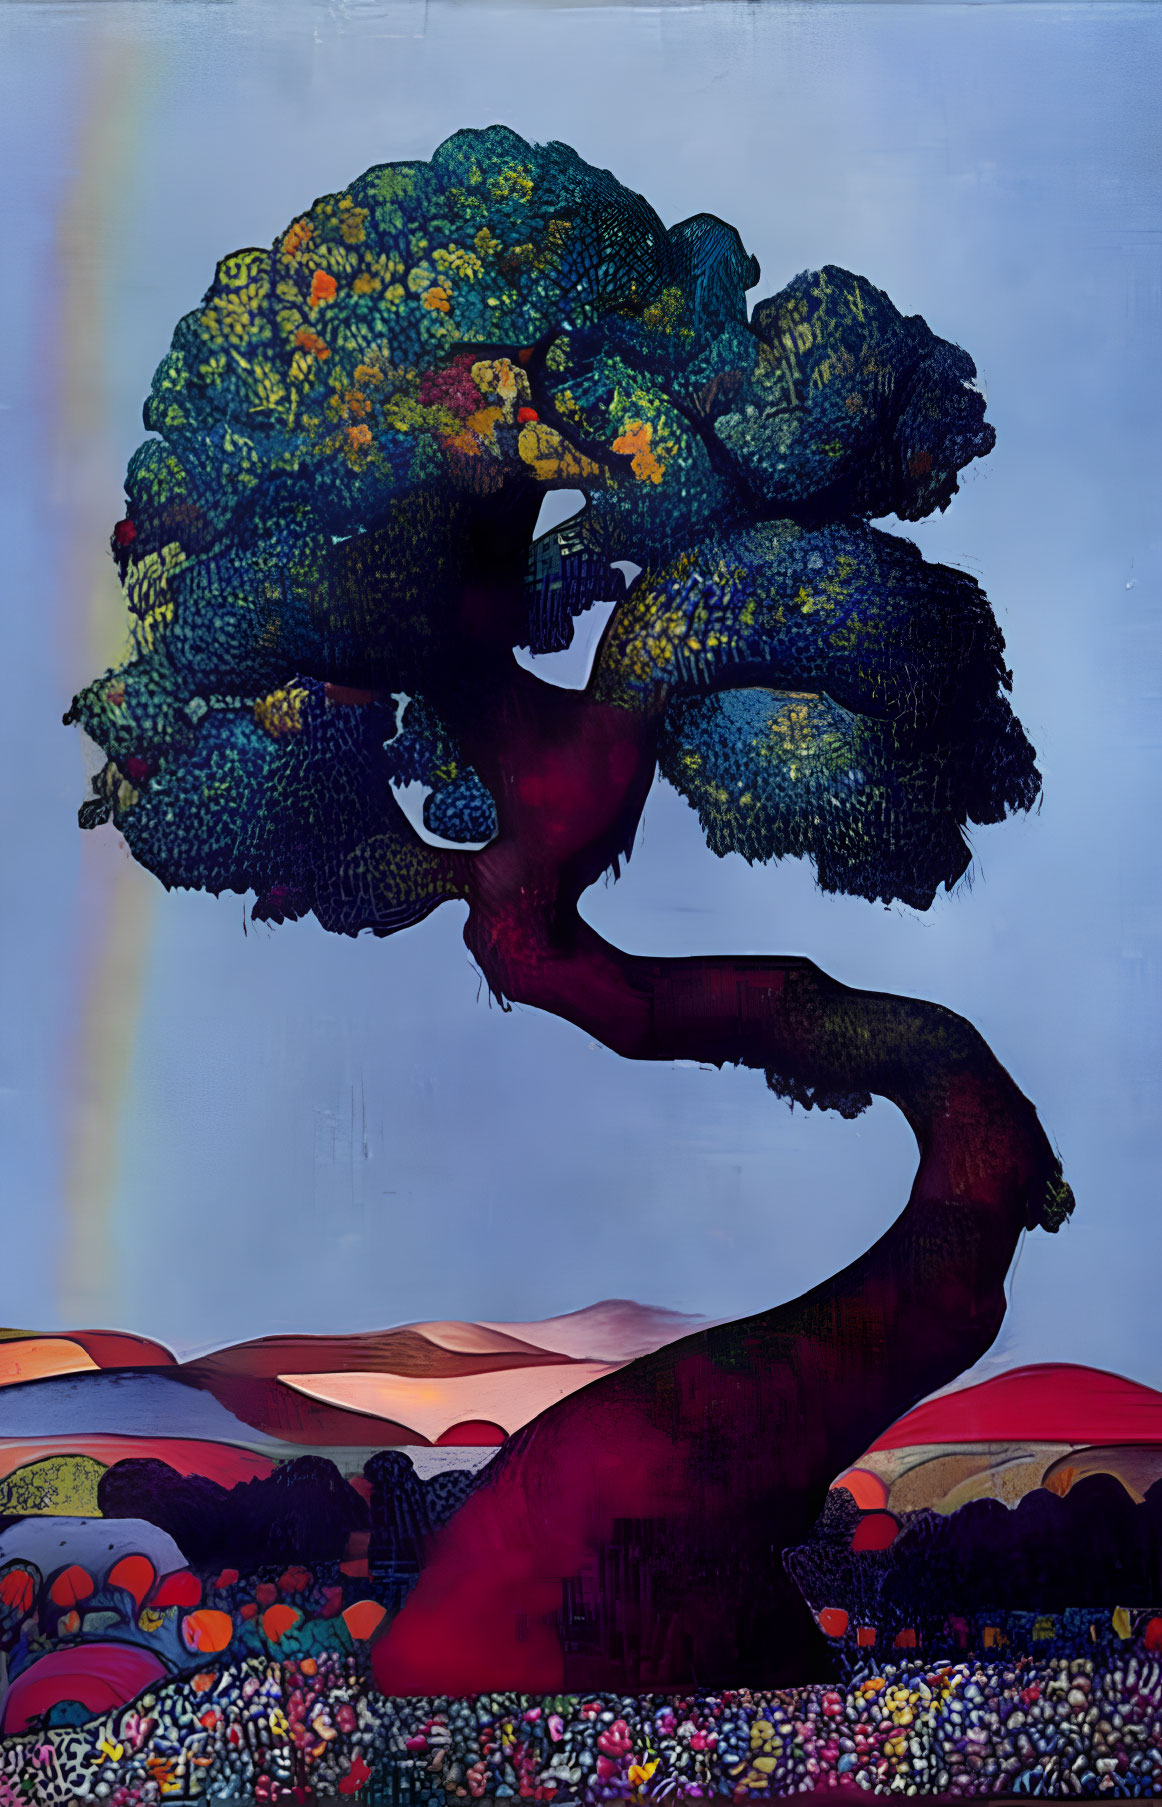 Whimsical tree with twisted trunk and vibrant canopy in surreal landscape